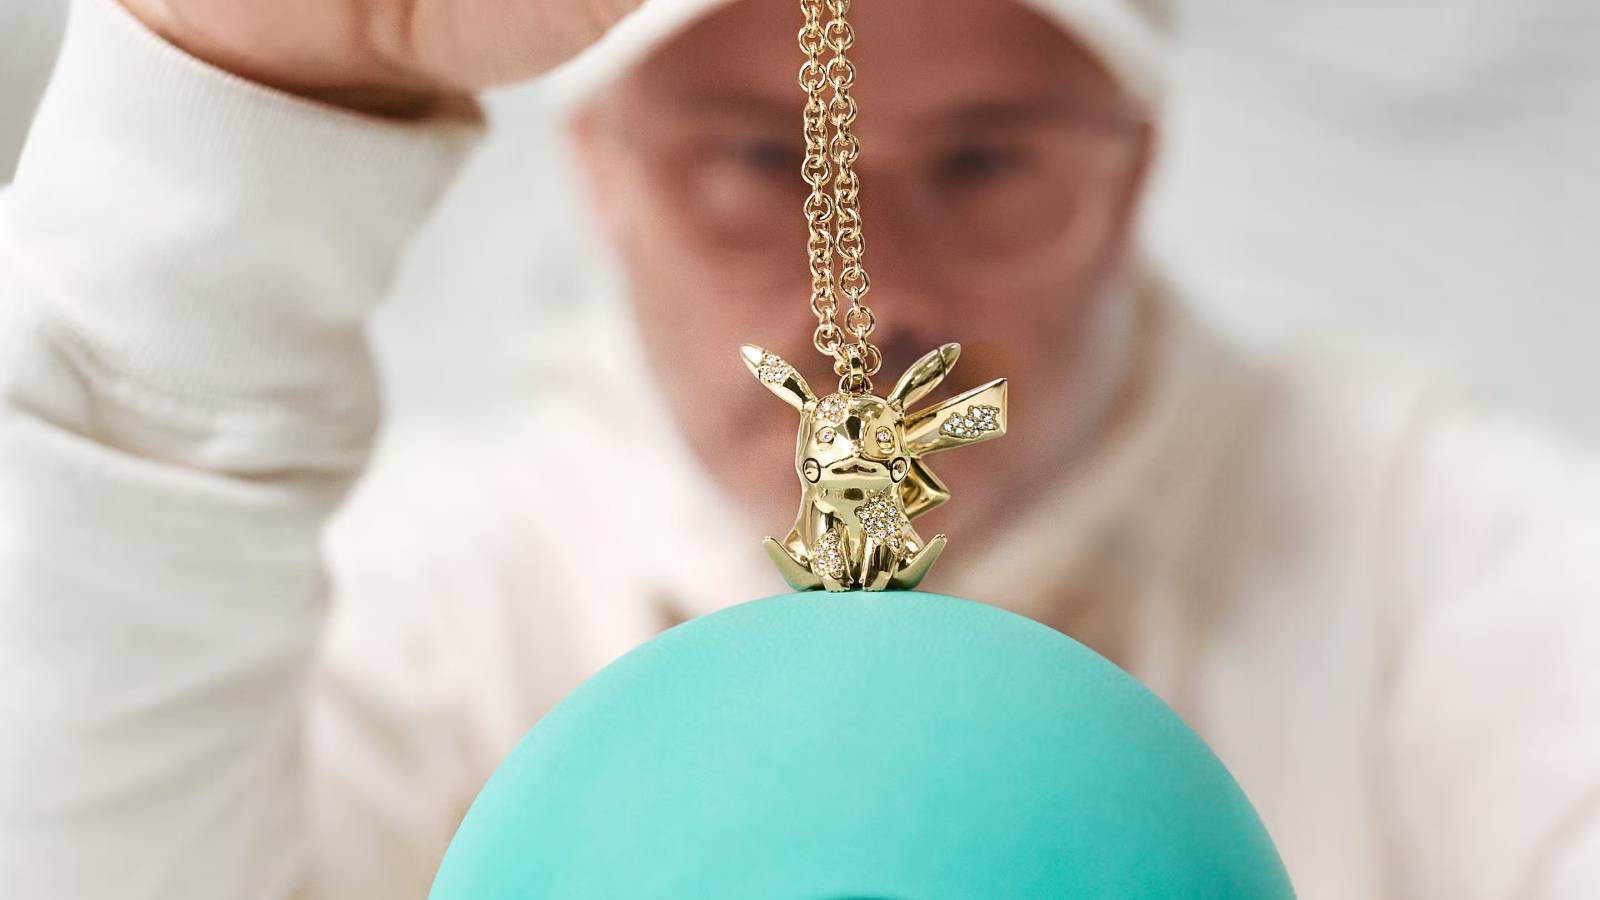 $29,000 diamond Pikachu necklace available just in time for